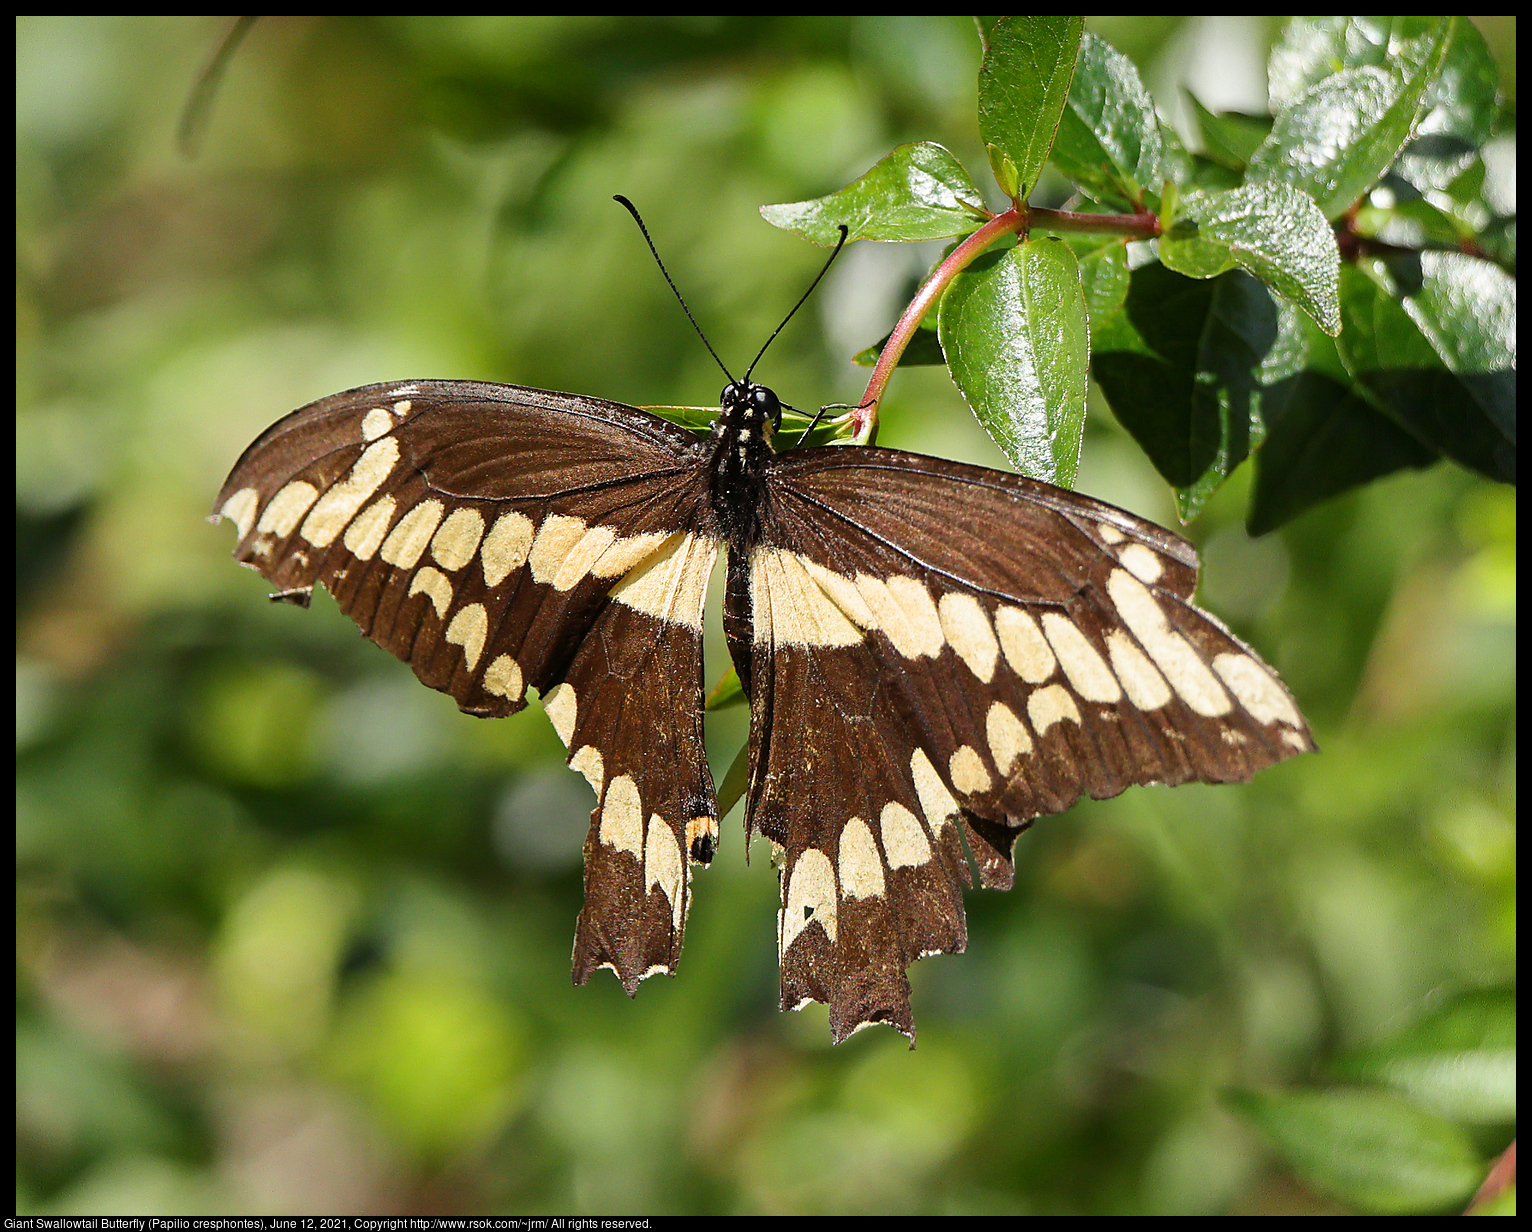 Giant Swallowtail Butterfly (Papilio cresphontes), June 12, 2021